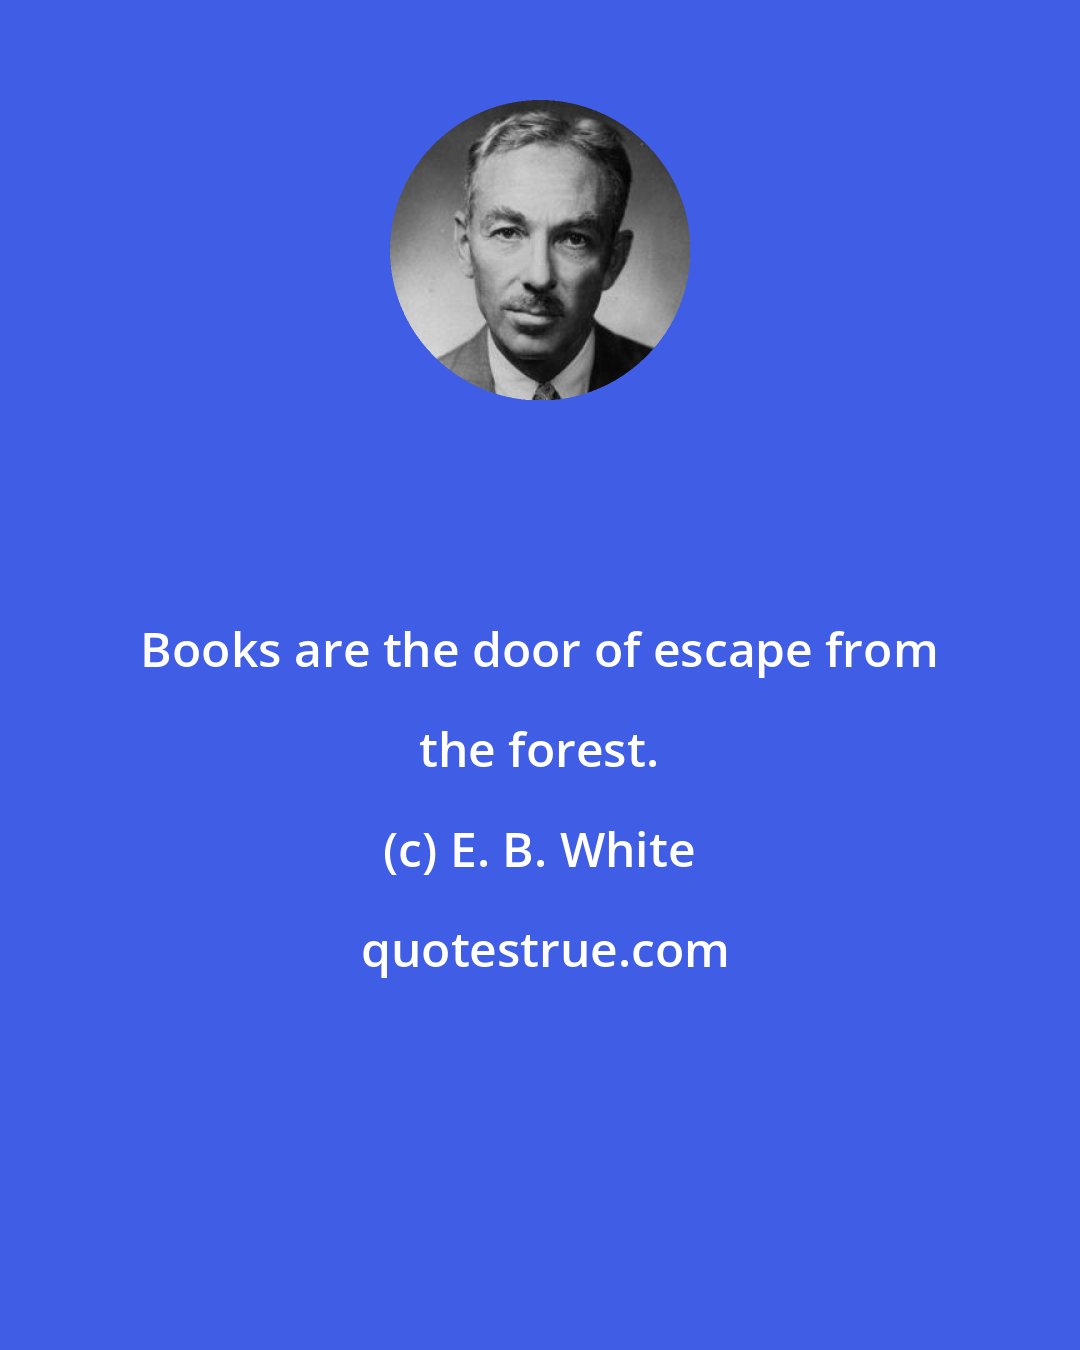 E. B. White: Books are the door of escape from the forest.